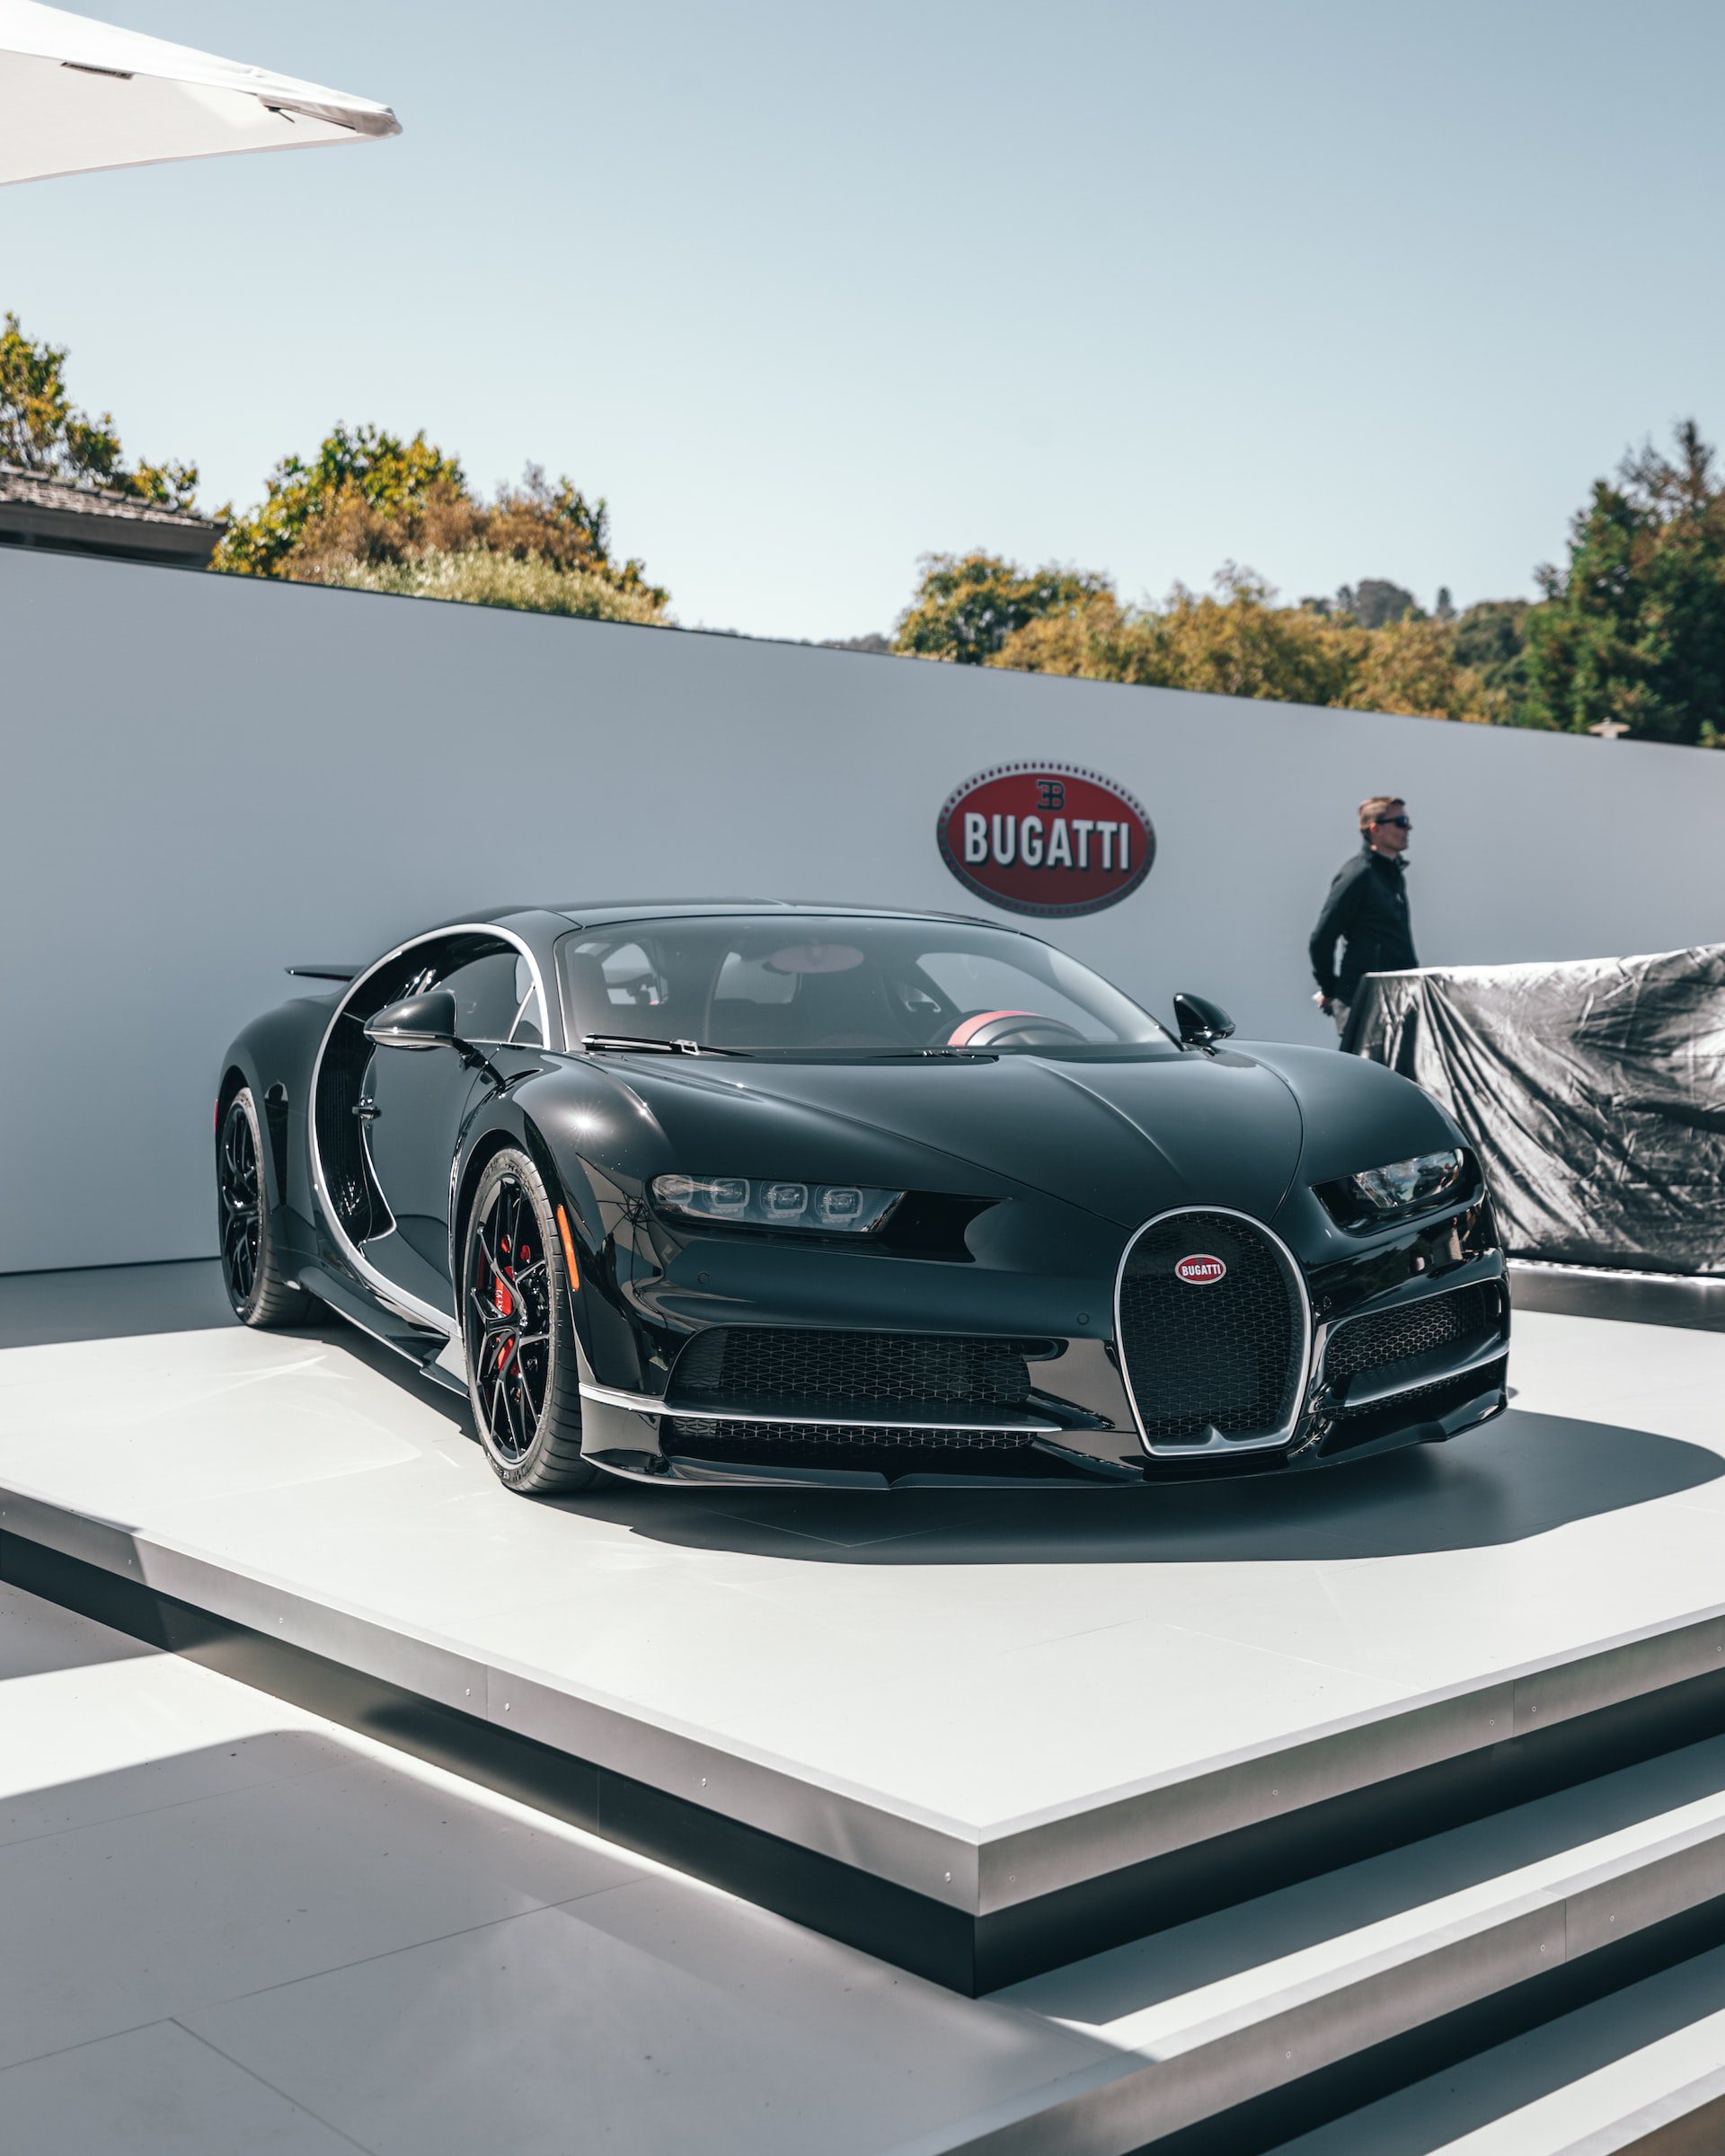 Ranking the Top 5 Most Expensive Luxury Cars on the Market Today